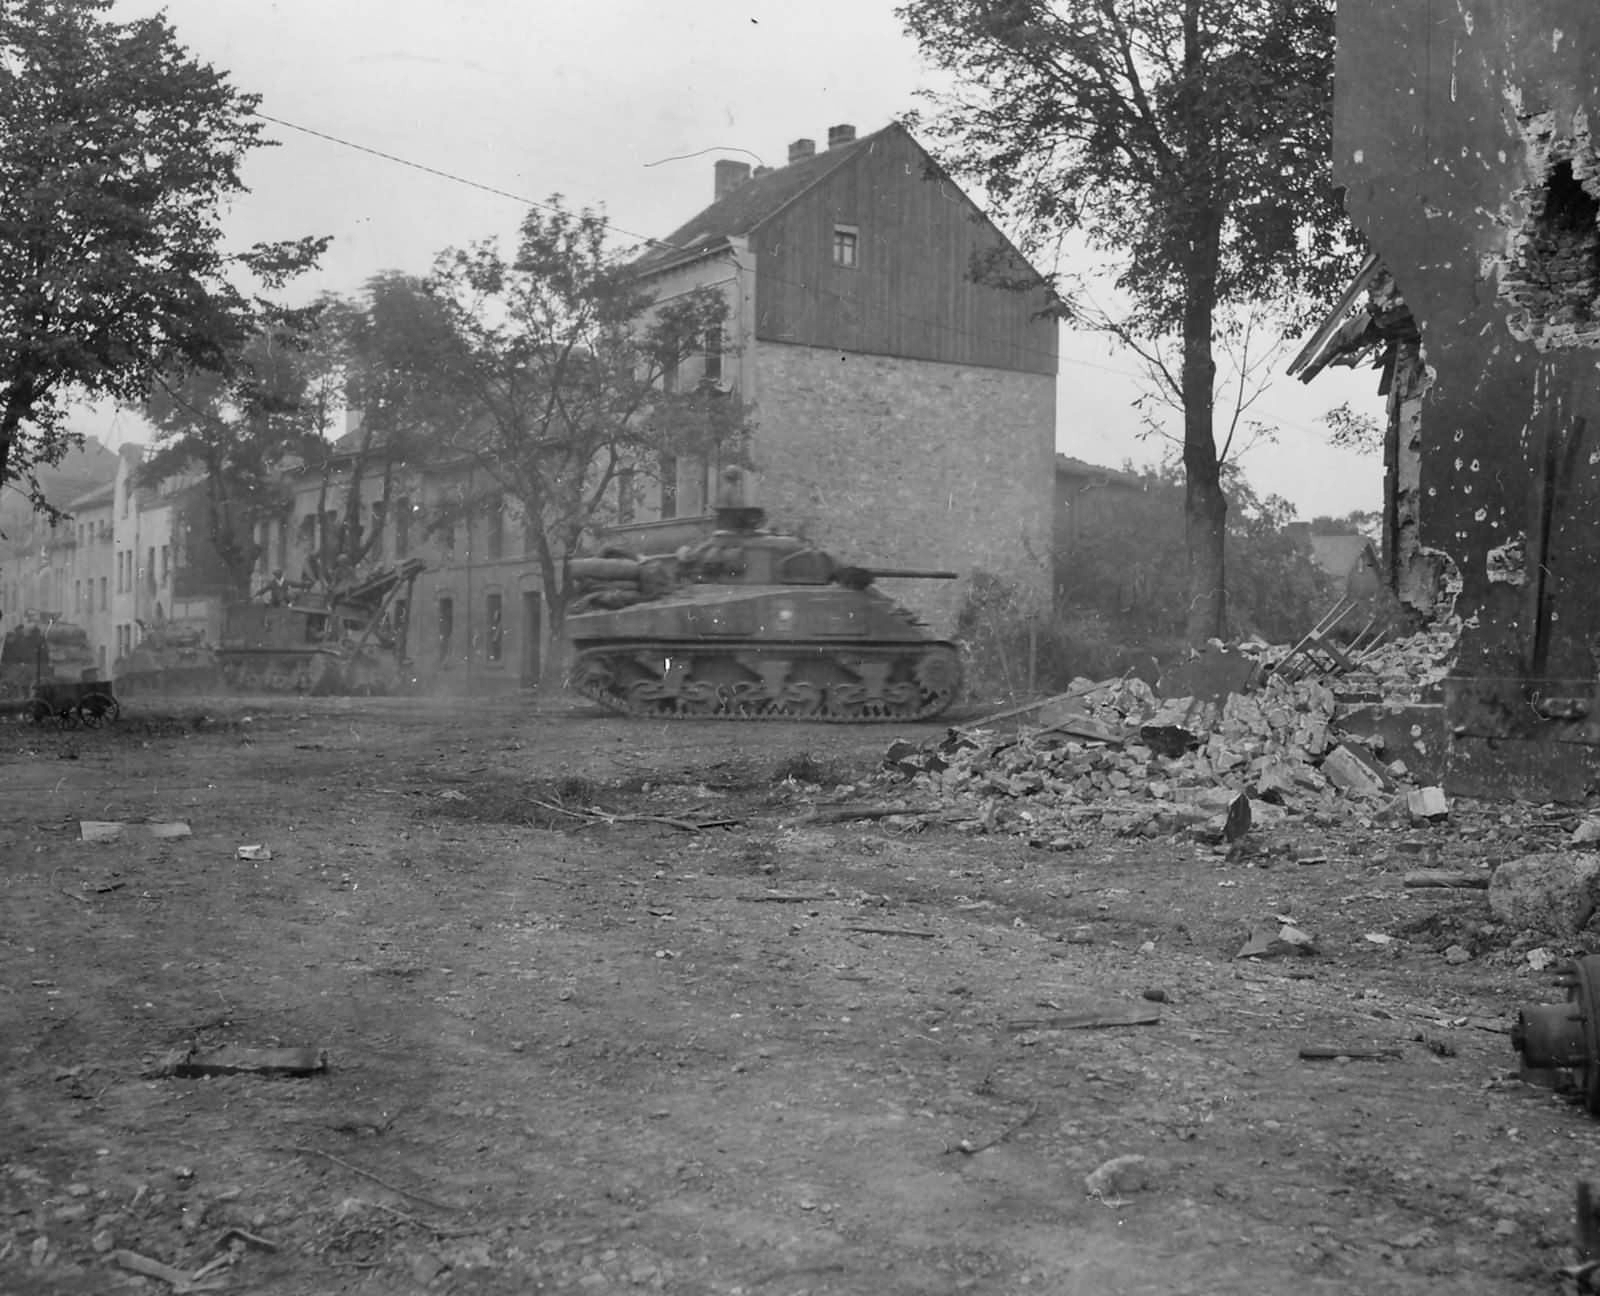 3rd_Armored_Division_M4_Sherman_and_T2_Grant_Recovery_Vehicle_Stolberg_Germany_1945